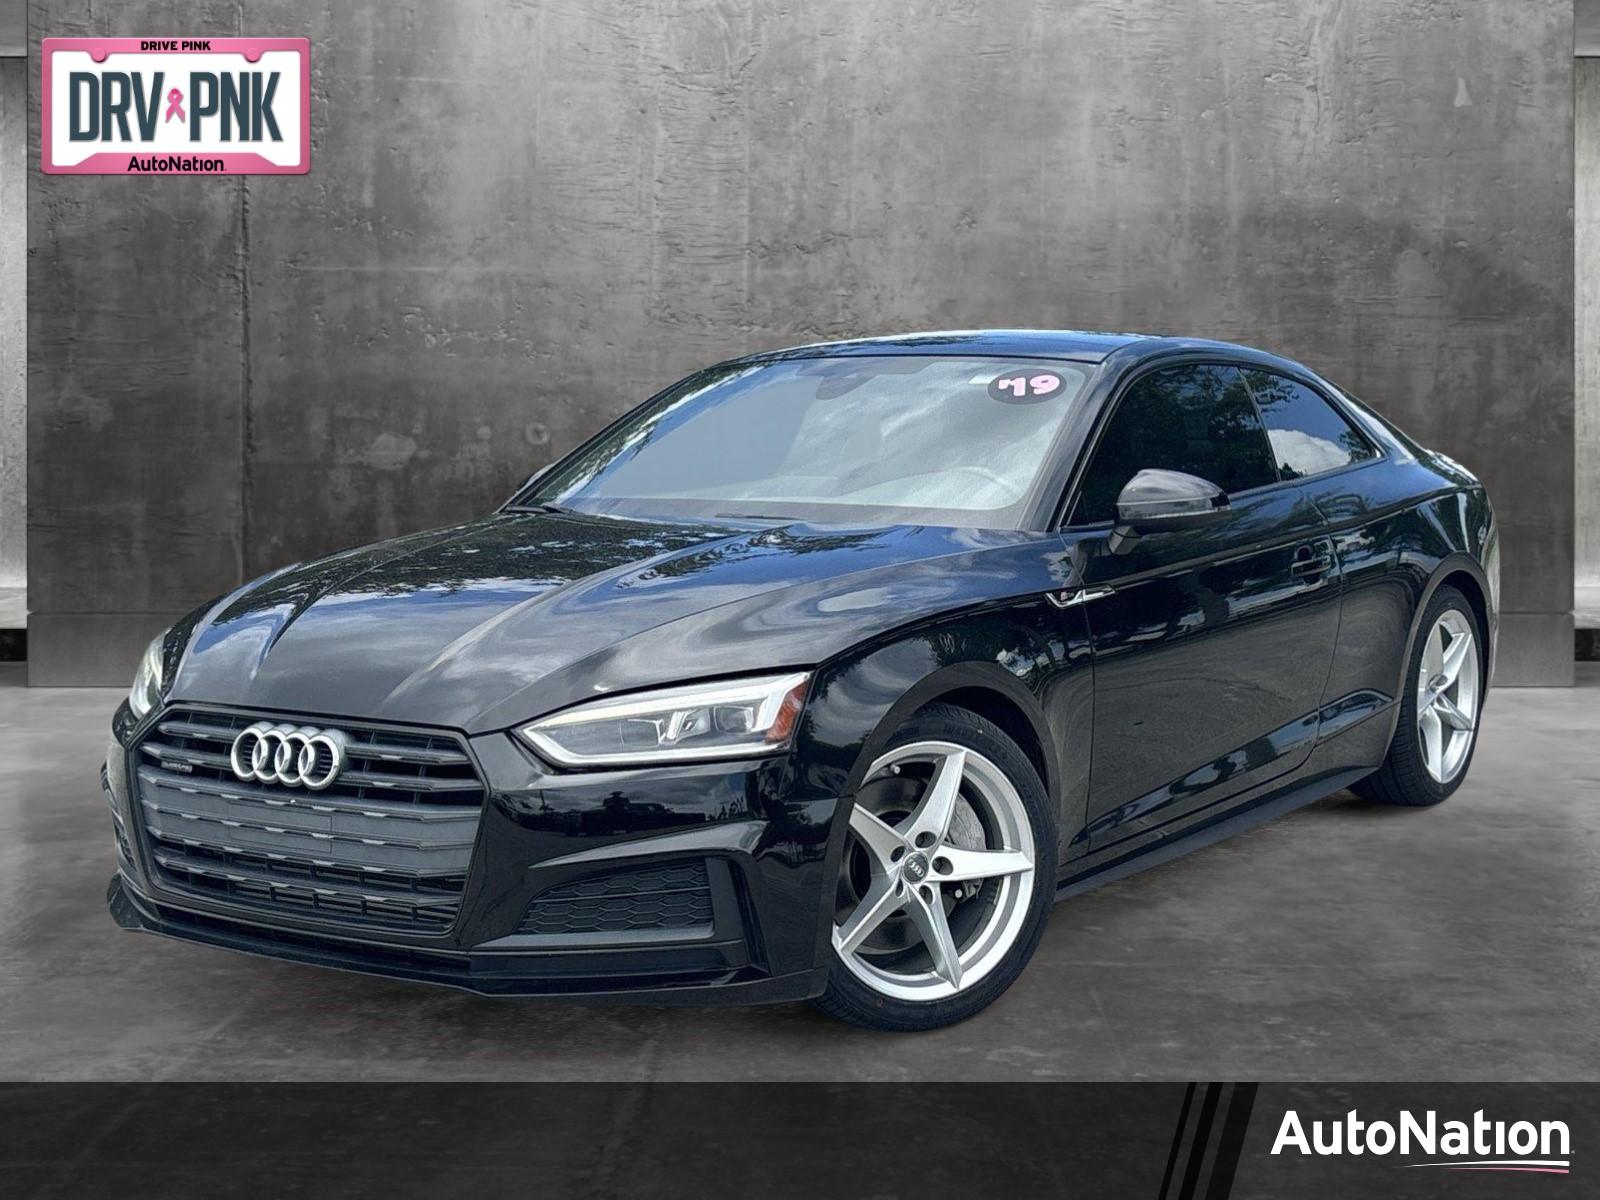 2019 Audi A5 Coupe Vehicle Photo in Margate, FL 33063